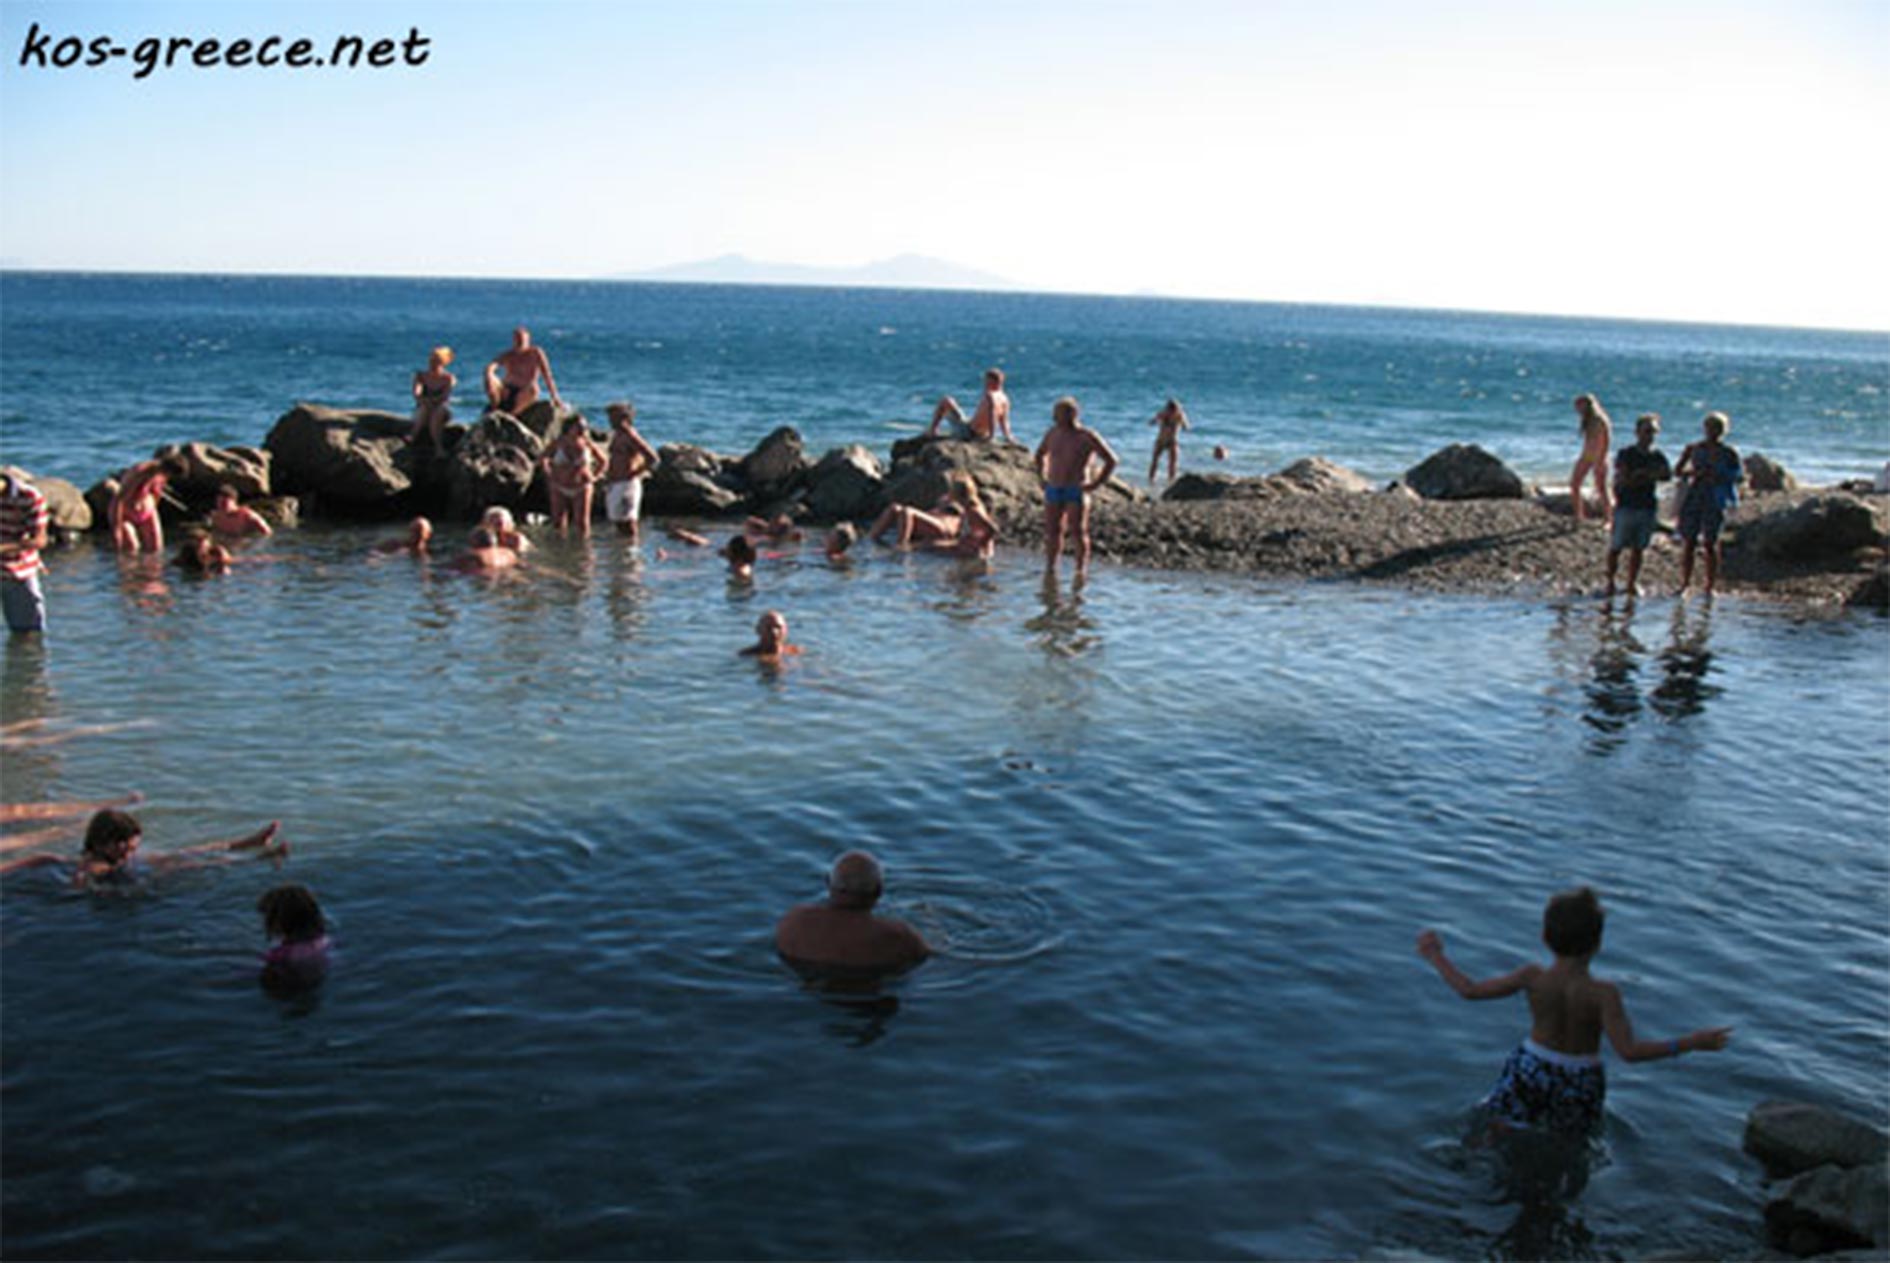 Thermes is a small natural sea-pool with hot water springs